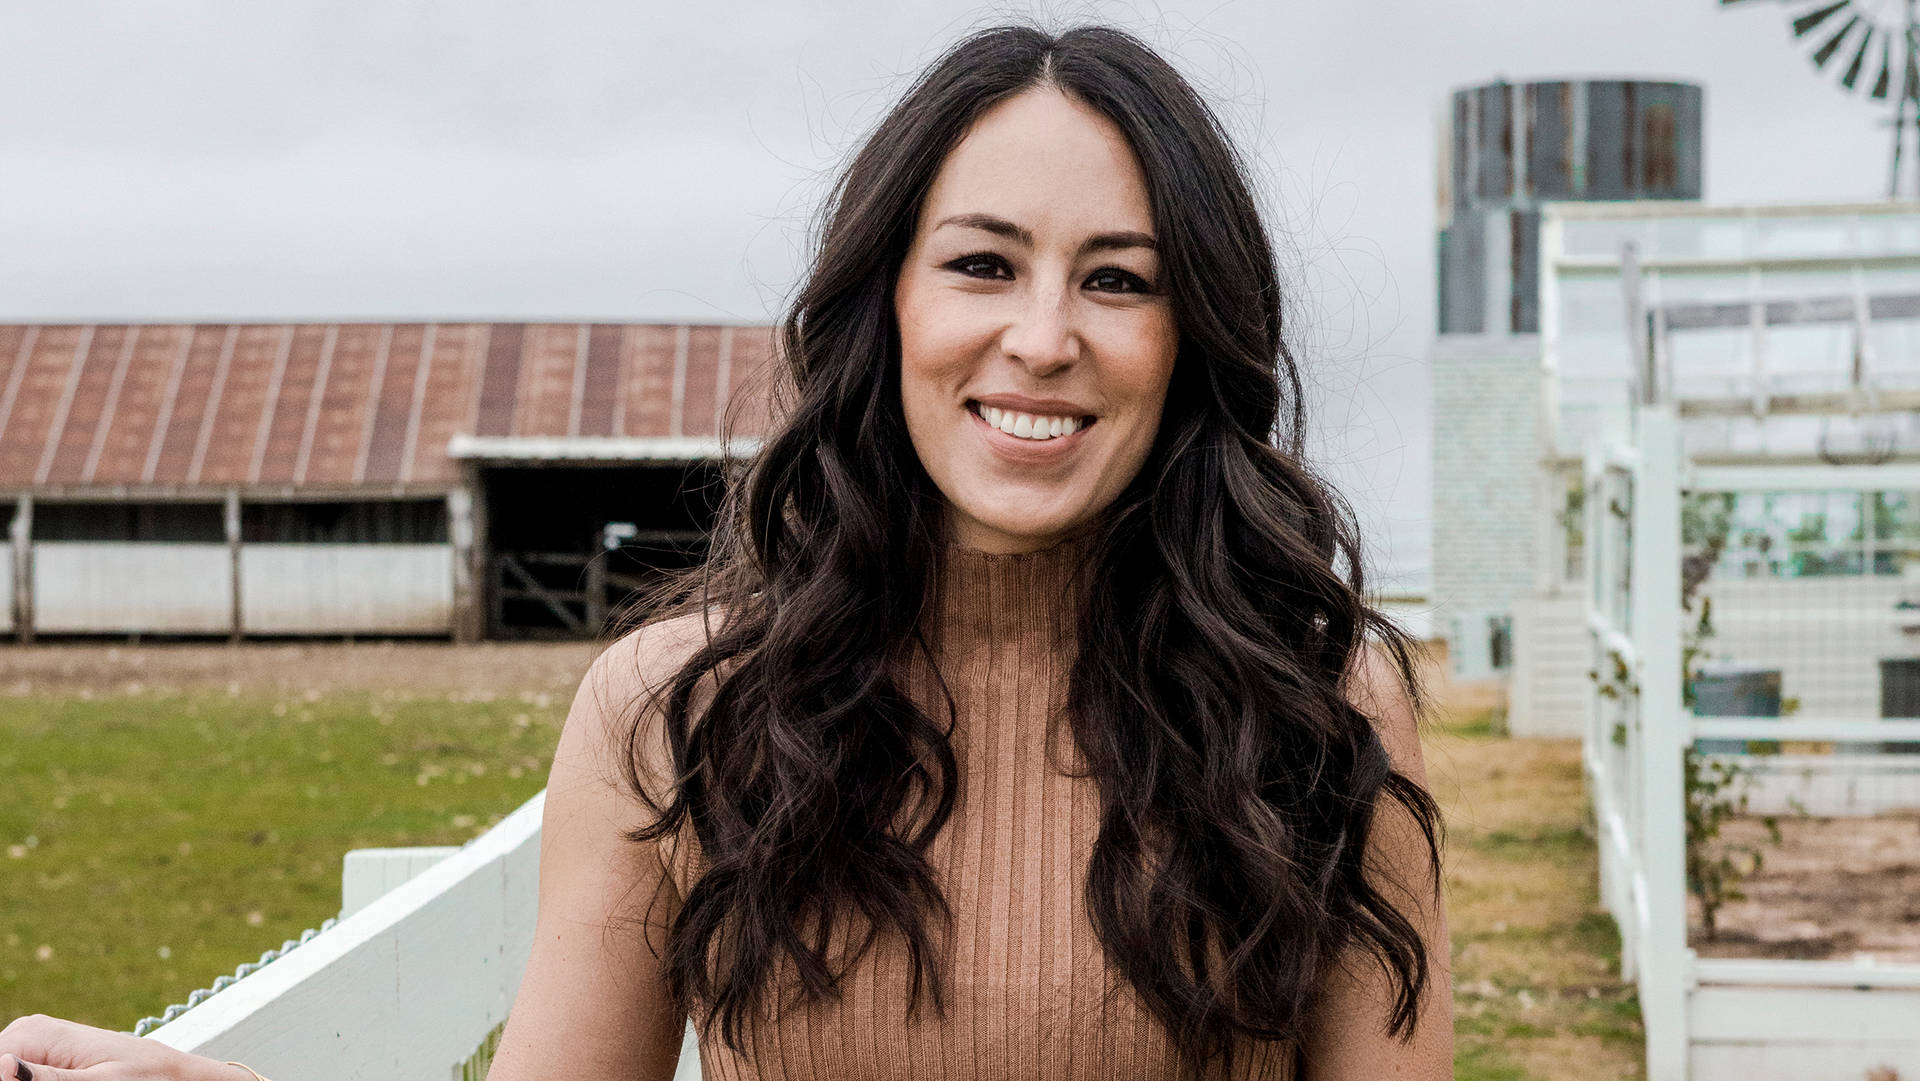 Top 999+ Joanna Gaines Wallpaper Full HD, 4K✅Free to Use